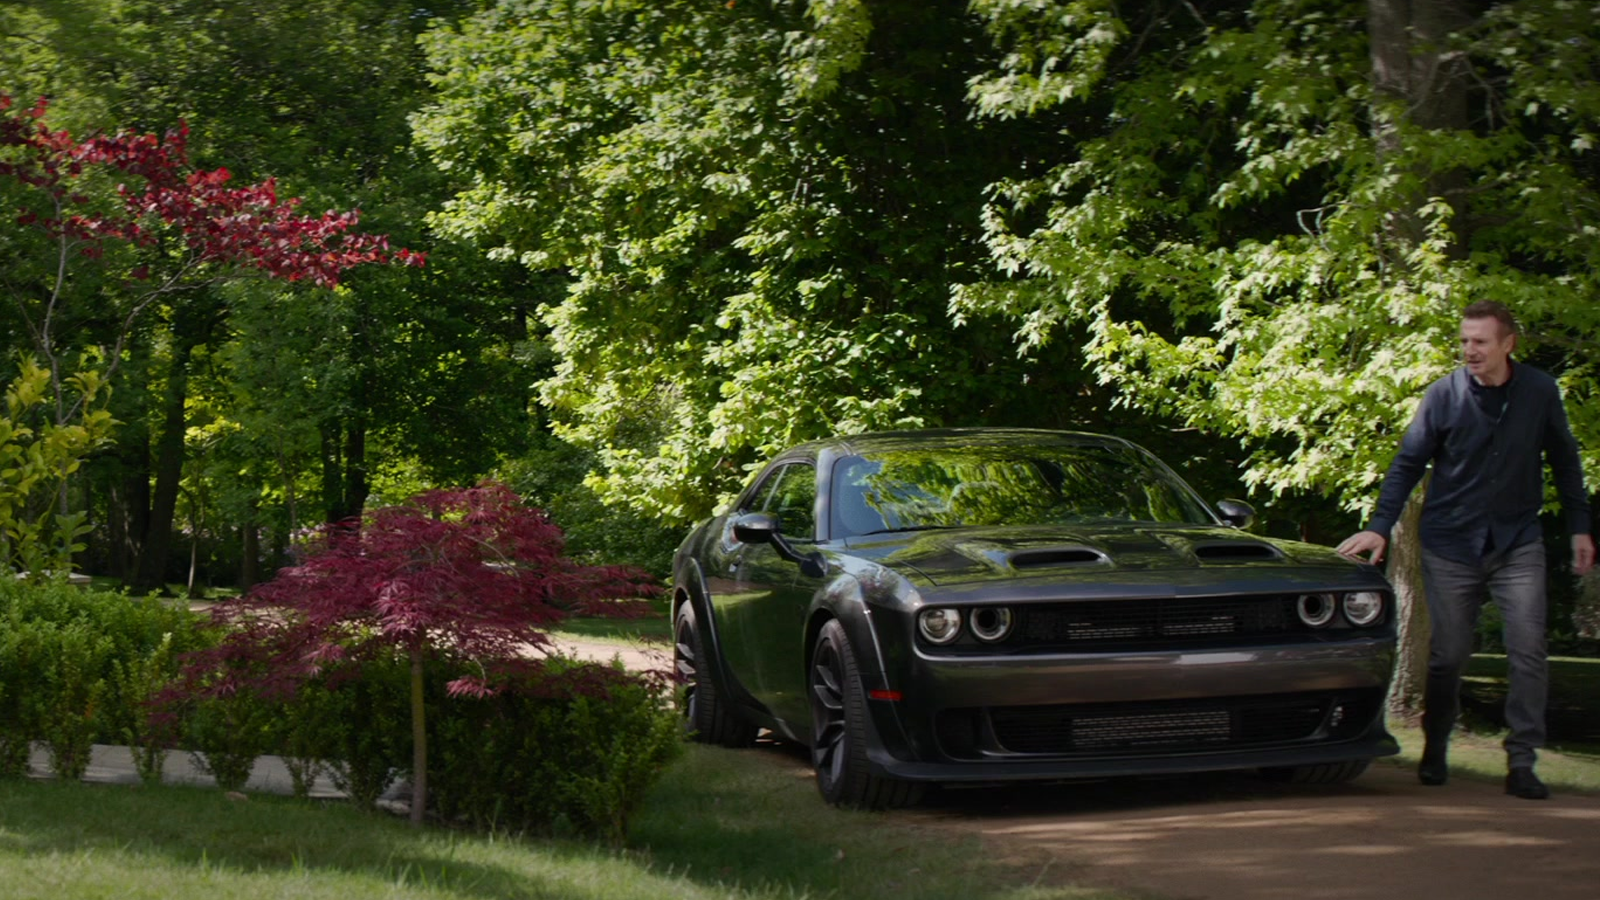 Dodge Cars Featured in Popular Hollywood Movies